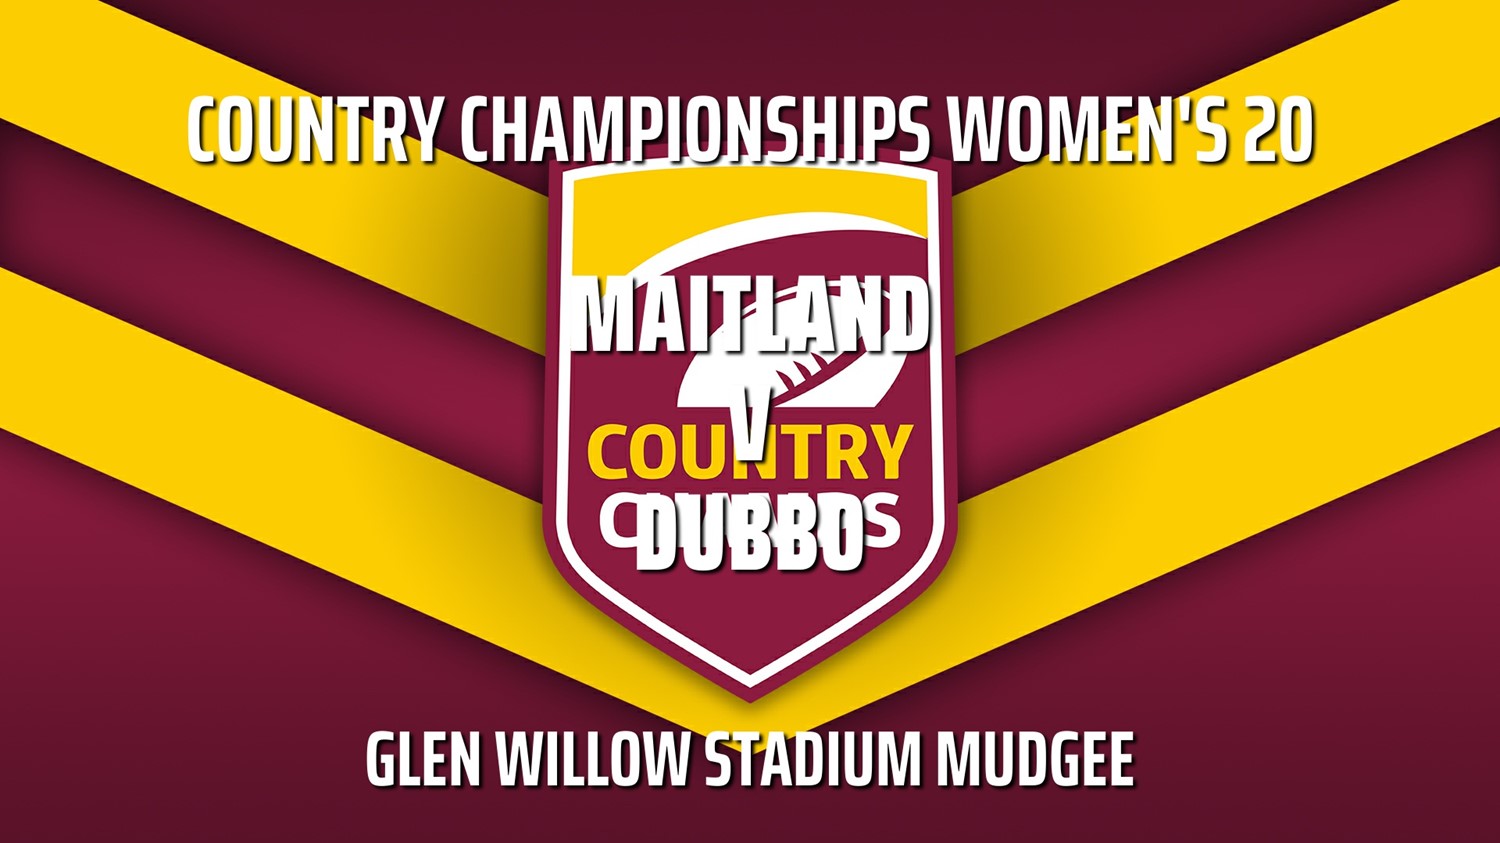 231015-Country Championships Women's 20 - Women's 20 - Maitland Redbacks touch v Dubbo Touch Football Minigame Slate Image